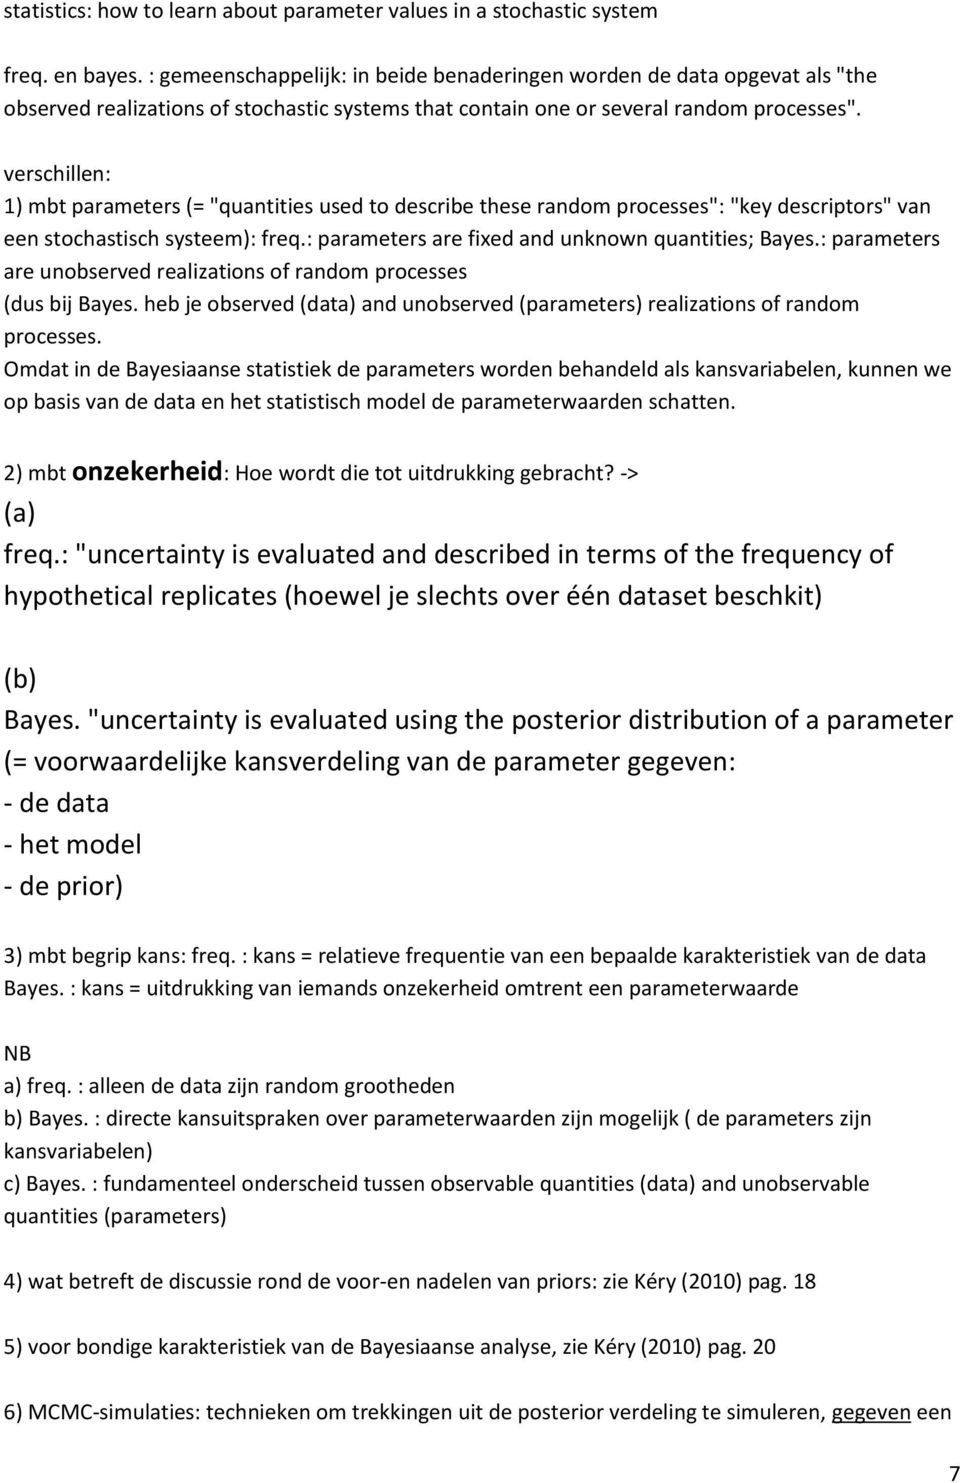 verschillen: 1) mbt parameters (= "quantities used to describe these random processes": "key descriptors" van een stochastisch systeem): freq.: parameters are fixed and unknown quantities; Bayes.